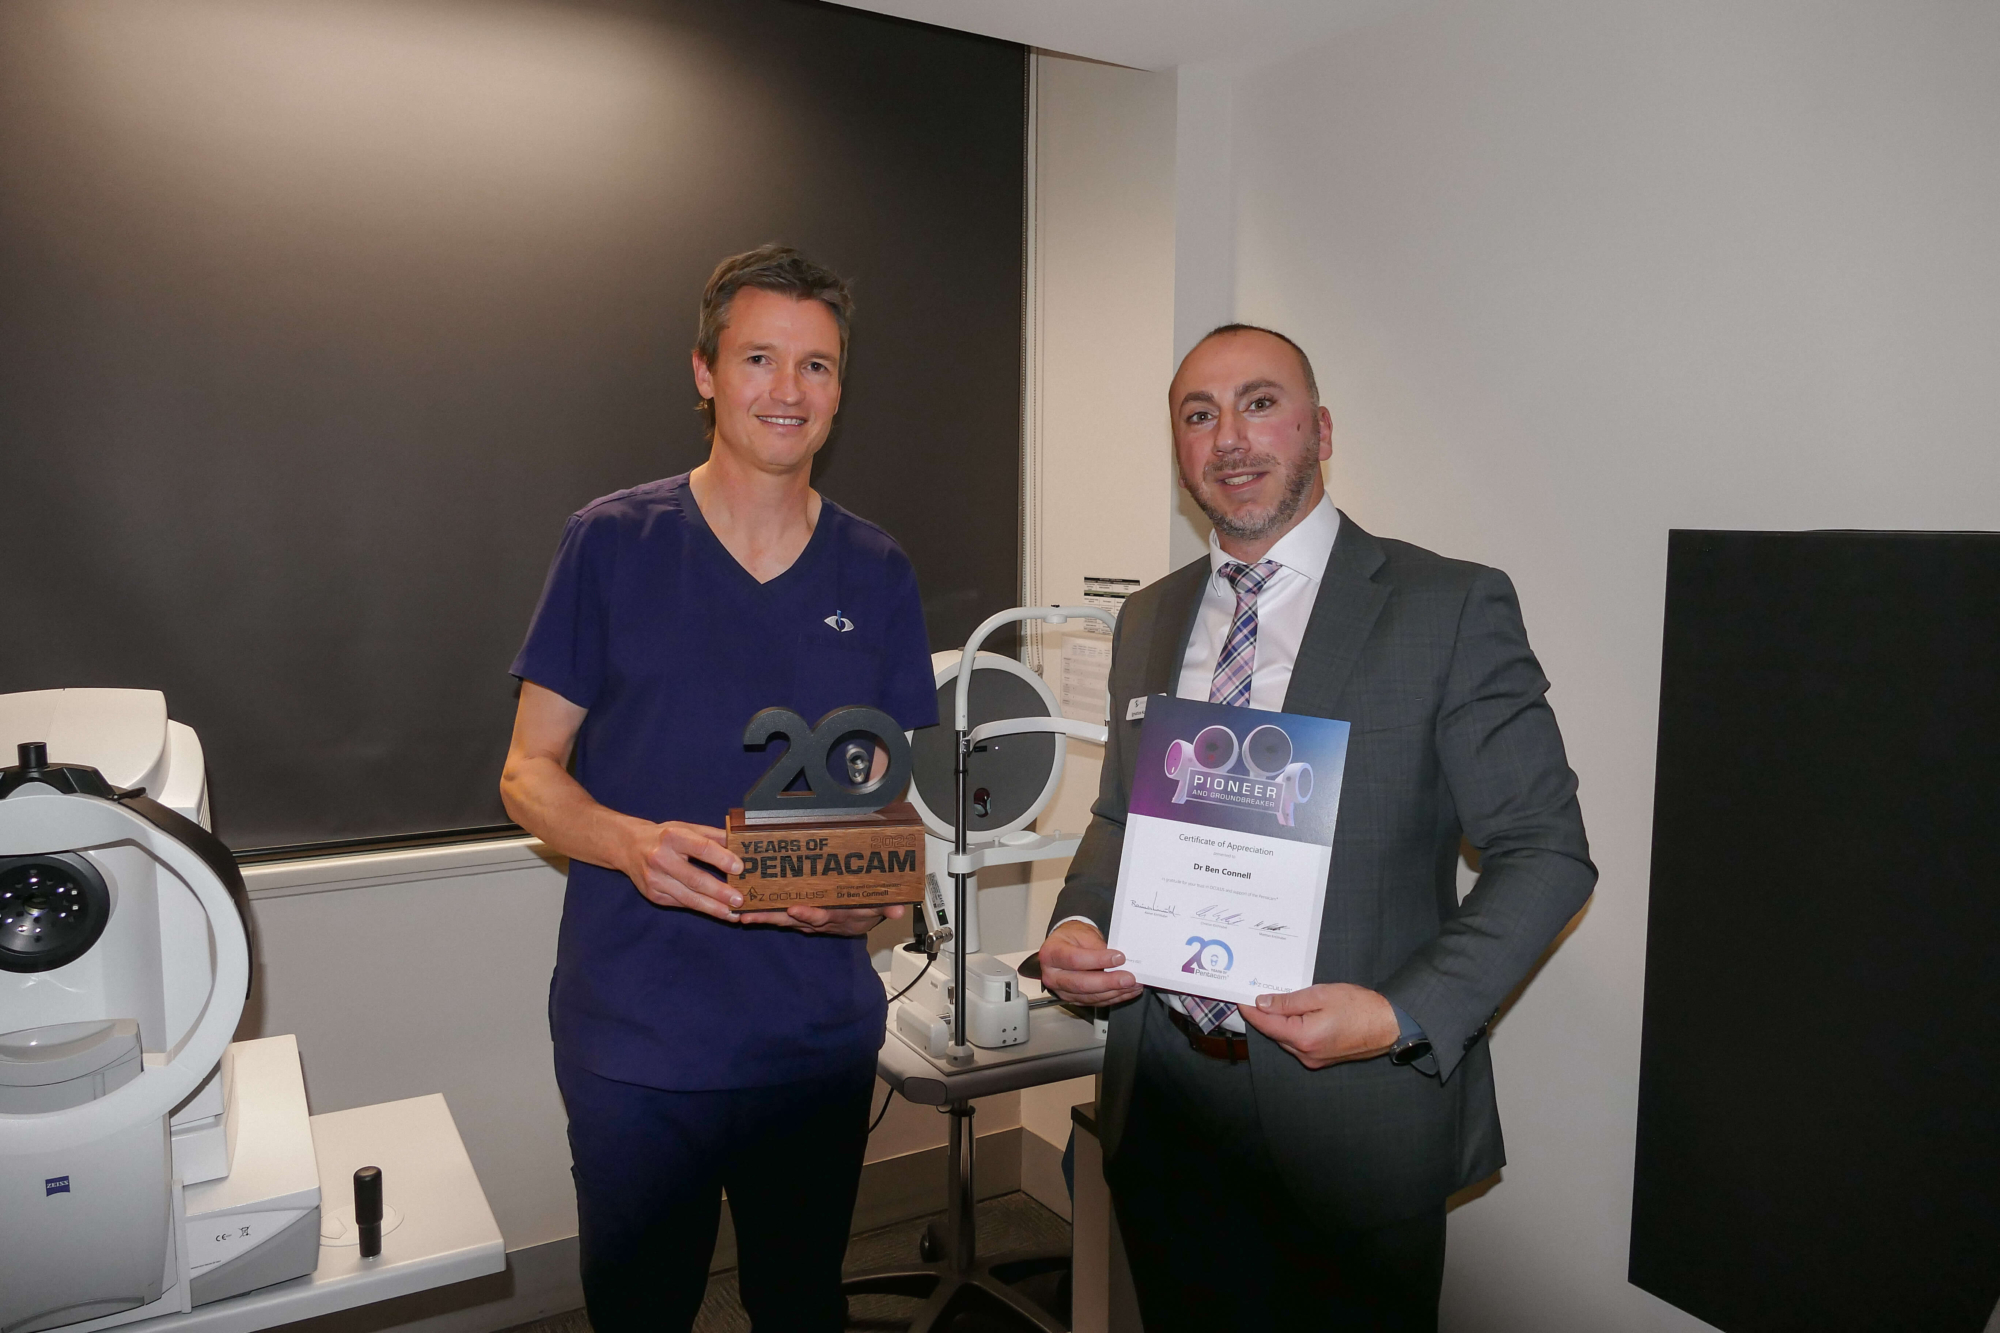 Dr Ben Connell receives the 20th Anniversary Pentacam® Trophy Certificate of Appreciation